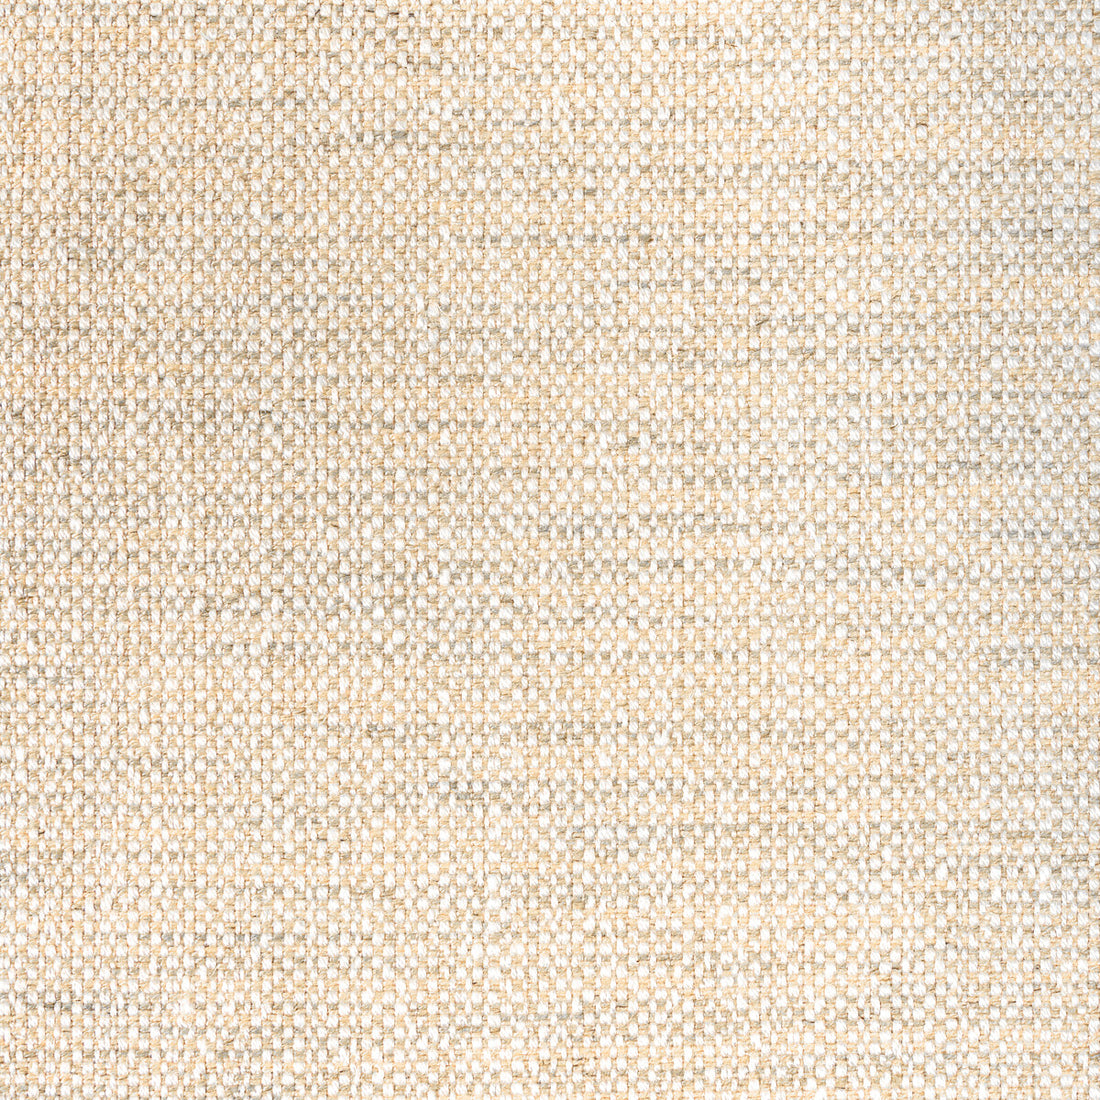 Rospico Plain fabric in cream color - pattern 8022110.1116.0 - by Brunschwig &amp; Fils in the Lorient Weaves collection